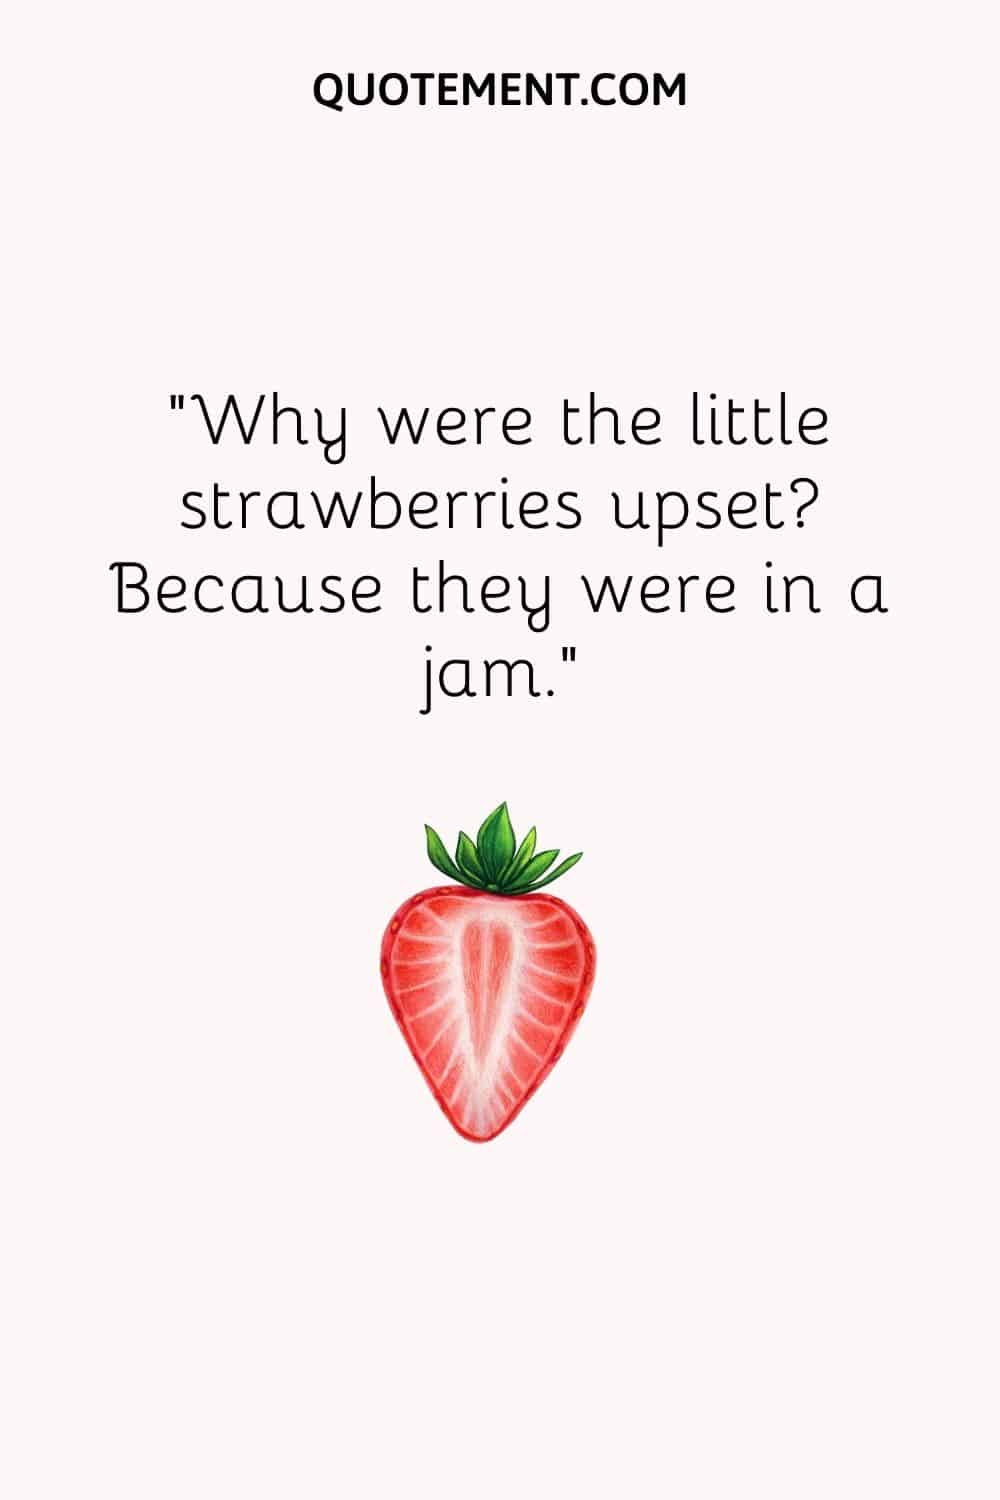 Why were the little strawberries upset